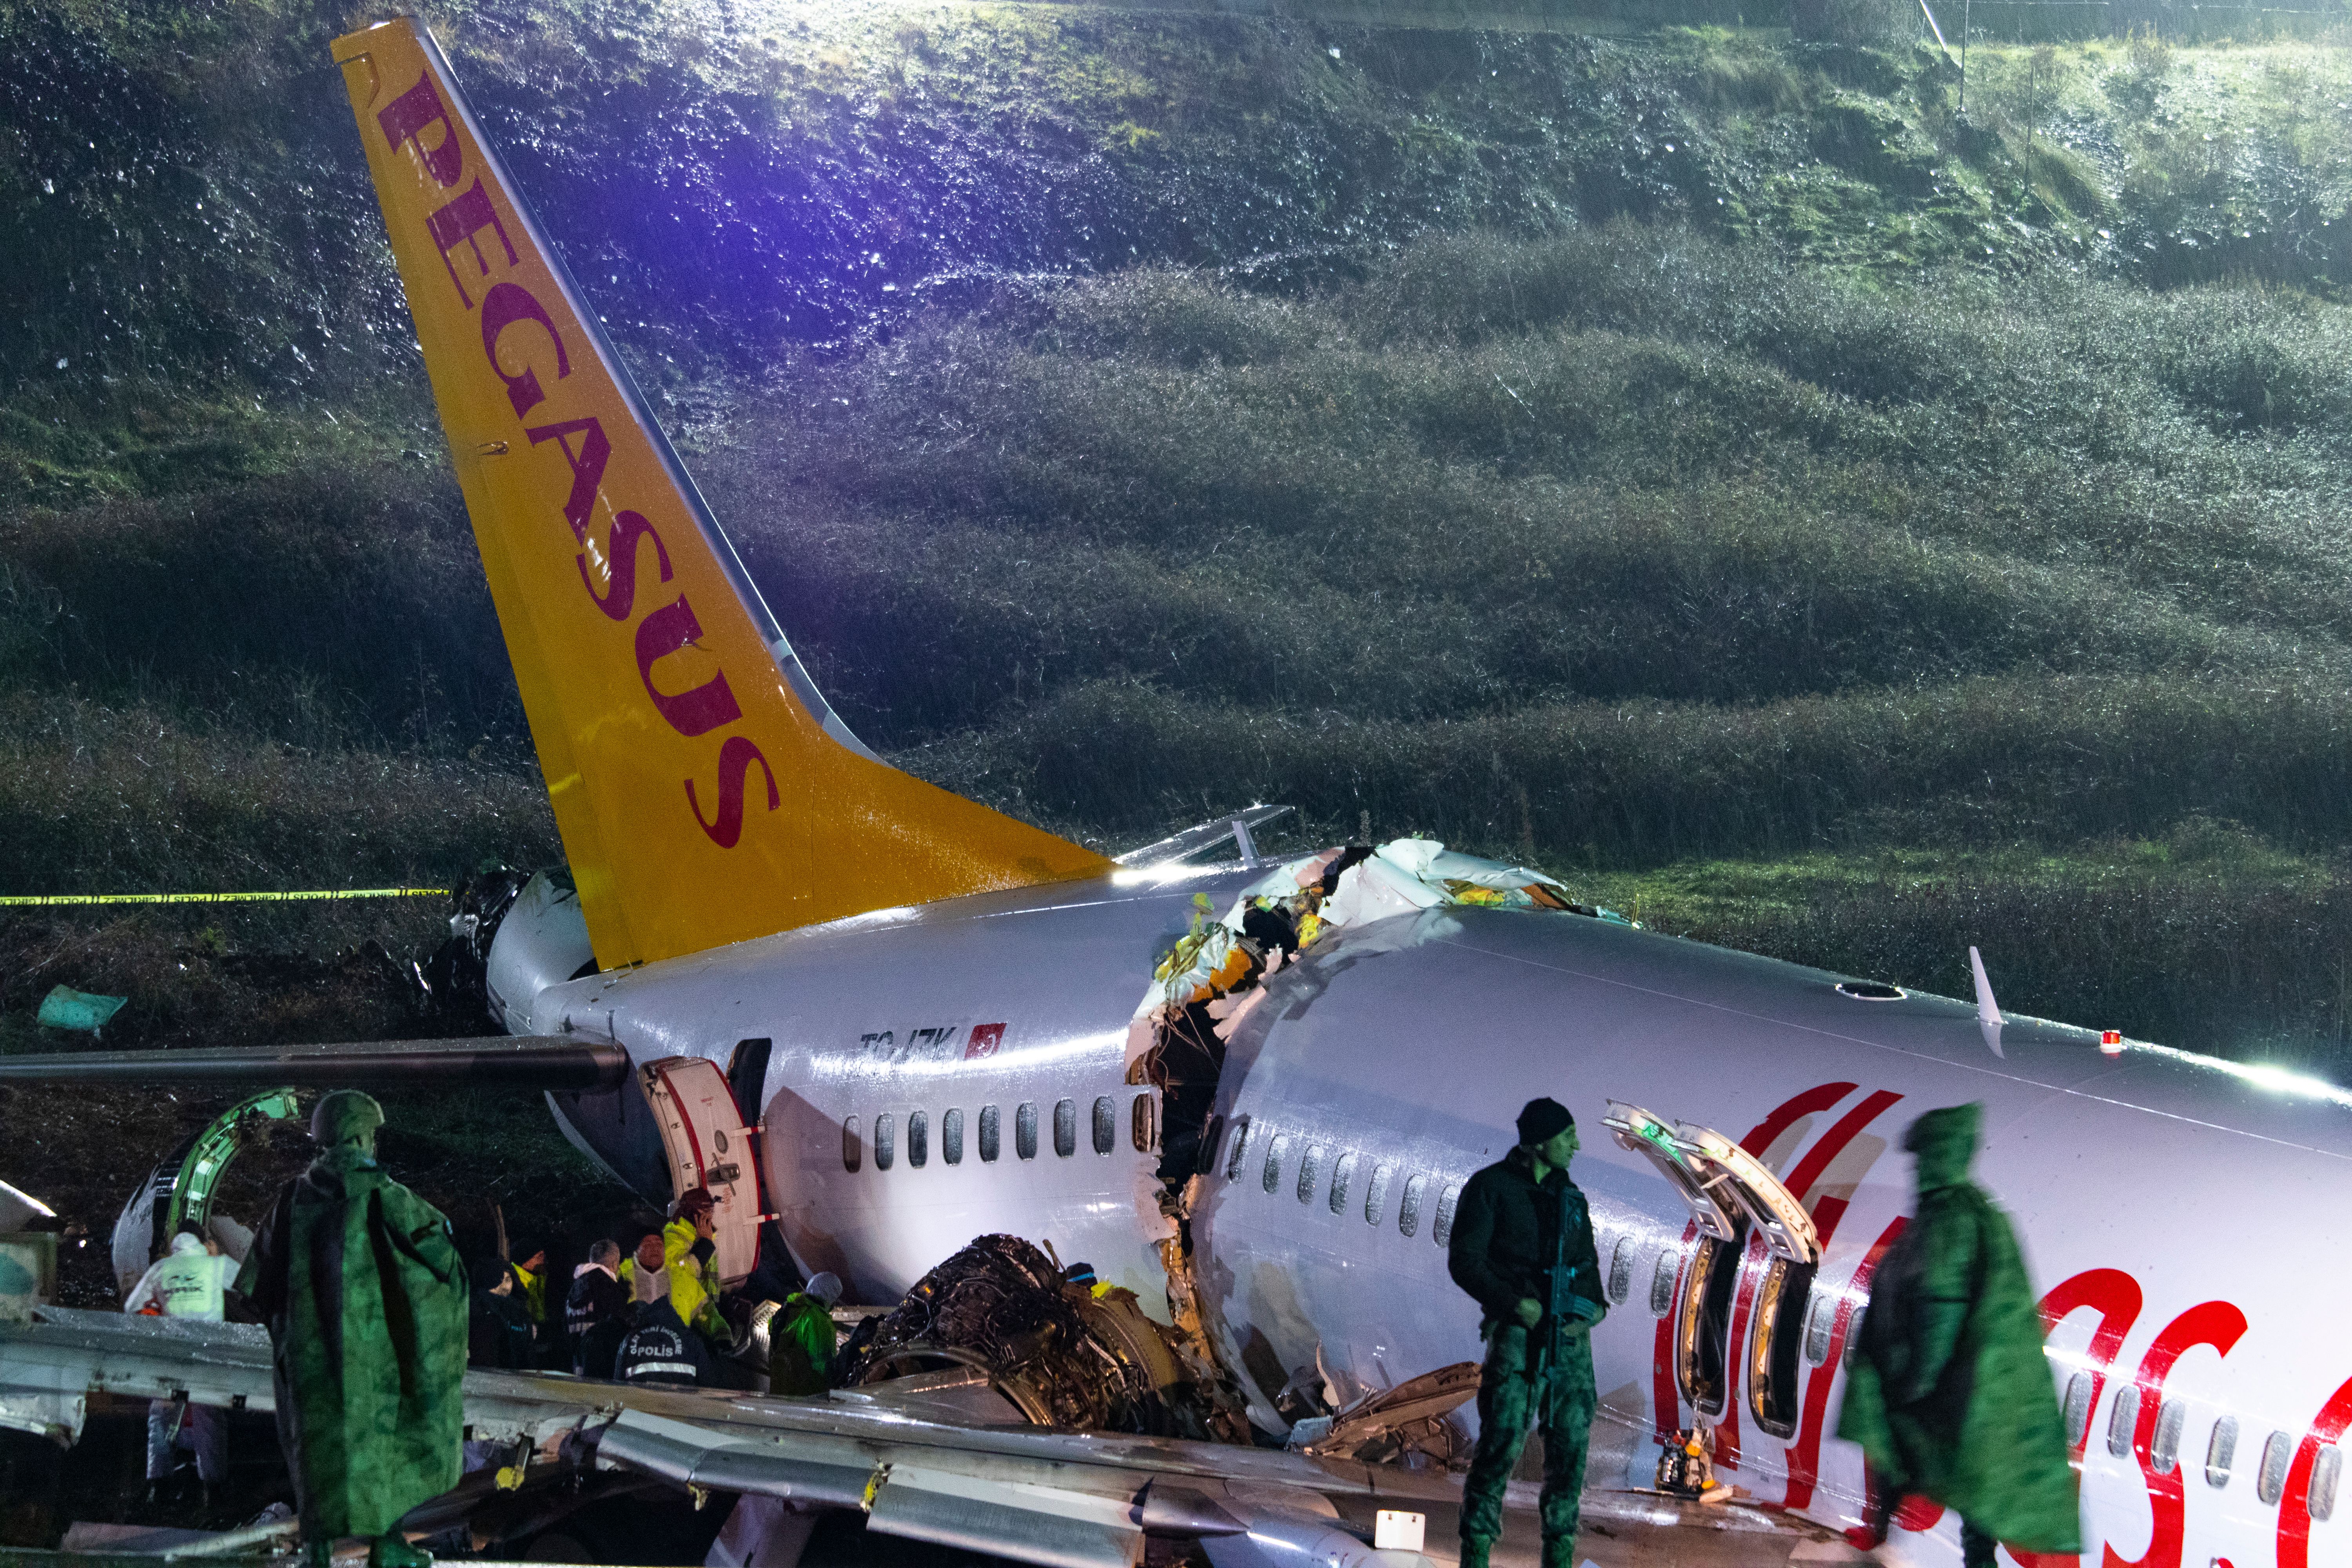 Pegasus Airlines plane crashed in Istanbul Sabiha Gokcen Airport. The plane was a Boeing 737-86J